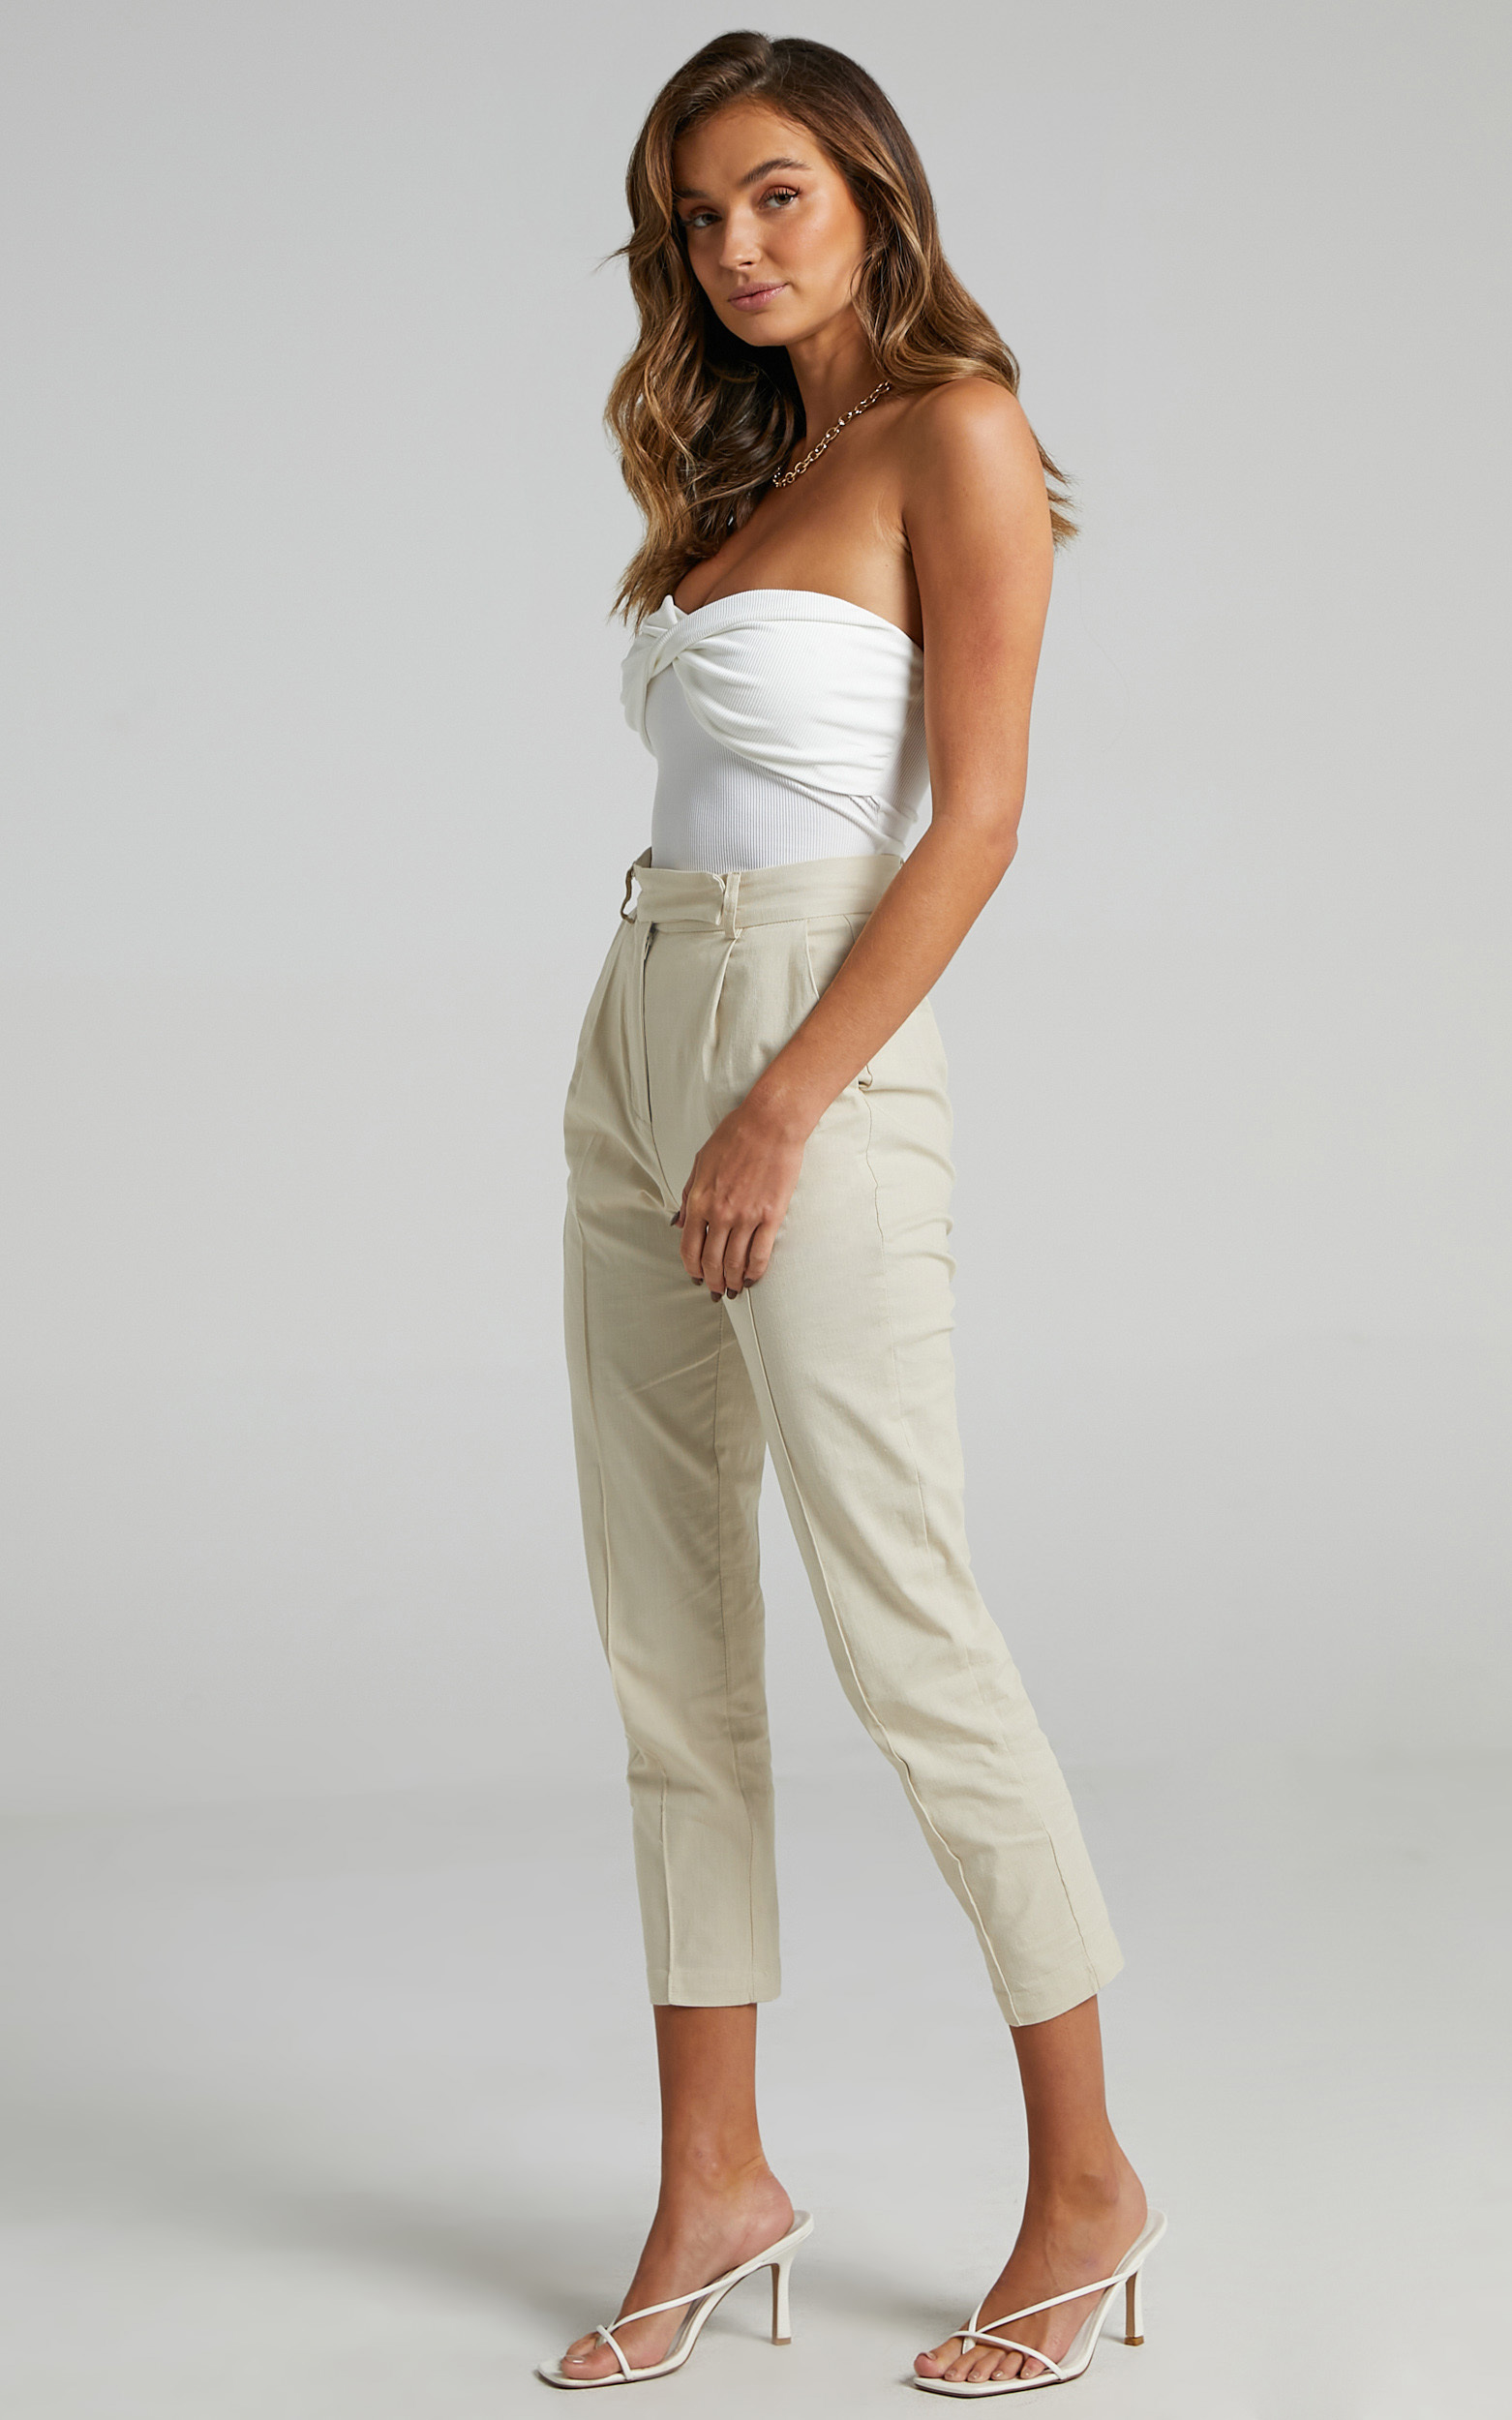 Runaway The Label - Calix Pants in Sand - L, BRN1, hi-res image number null